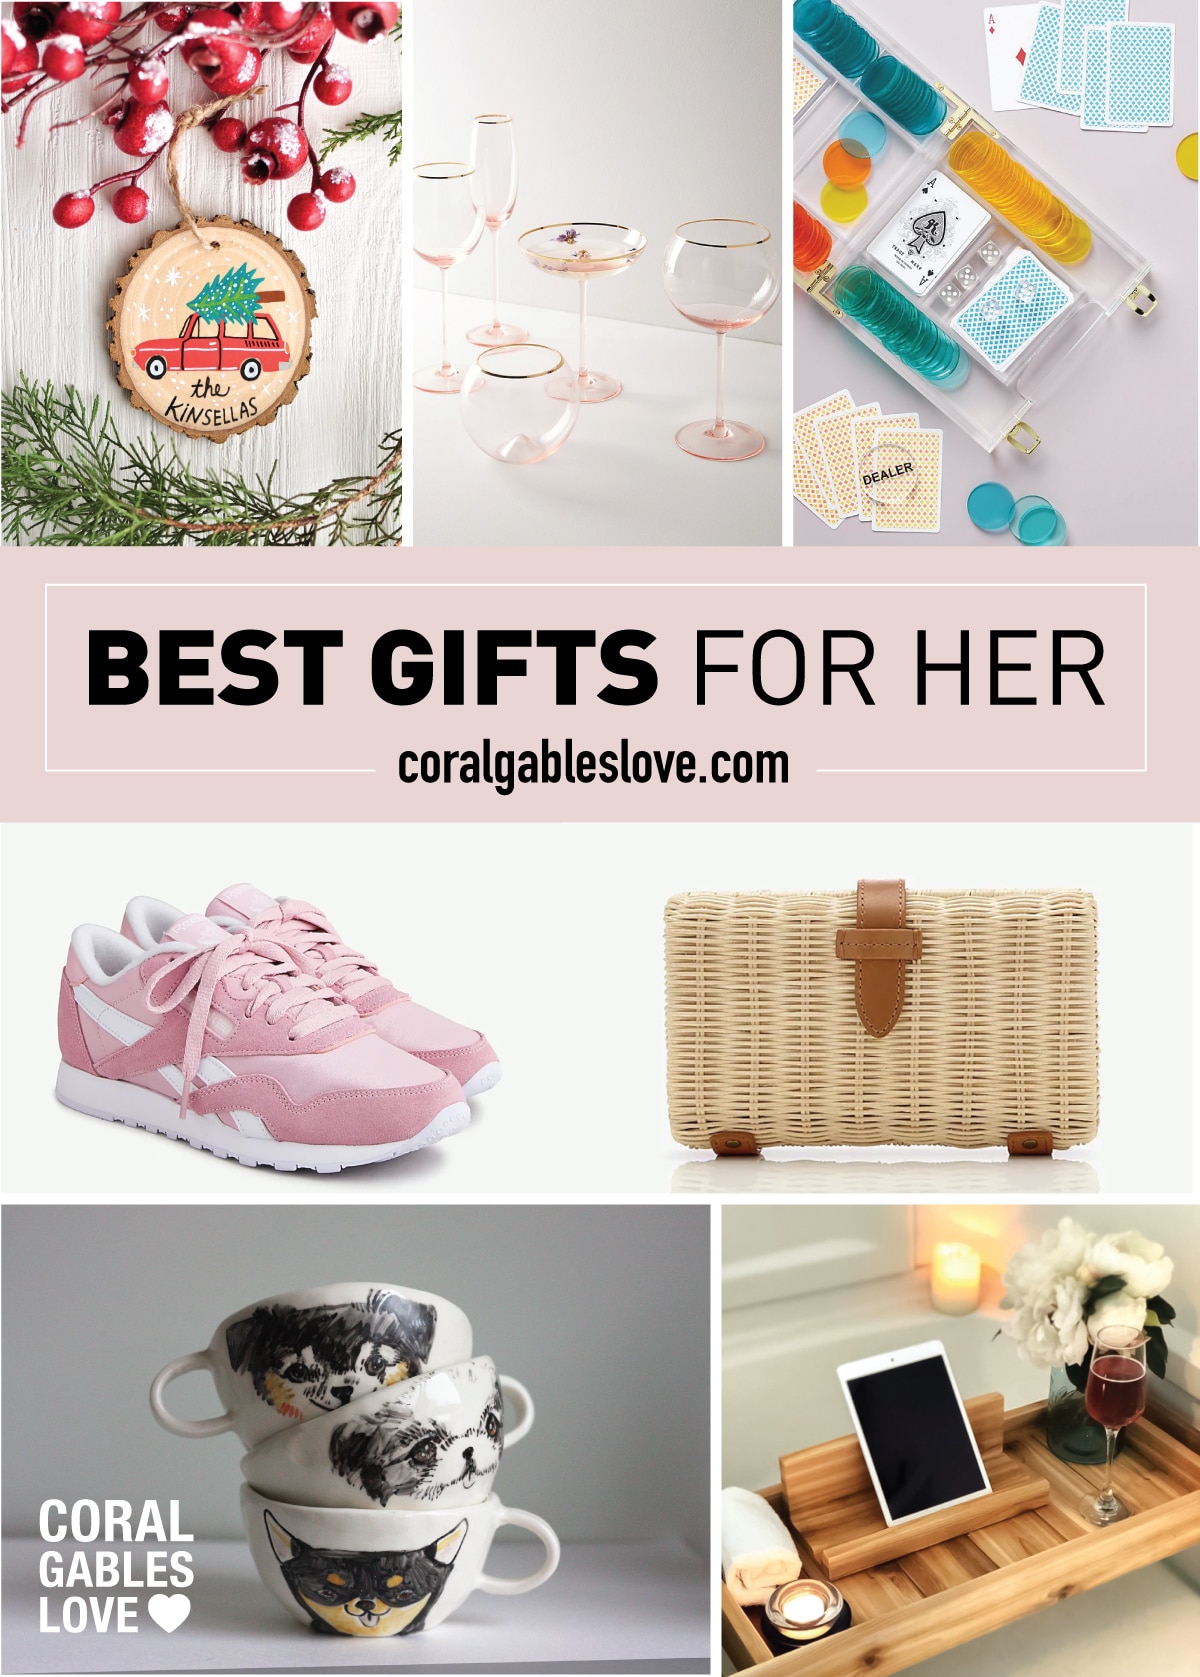 Best Gifts For Her 2020 - Coral Gables Love